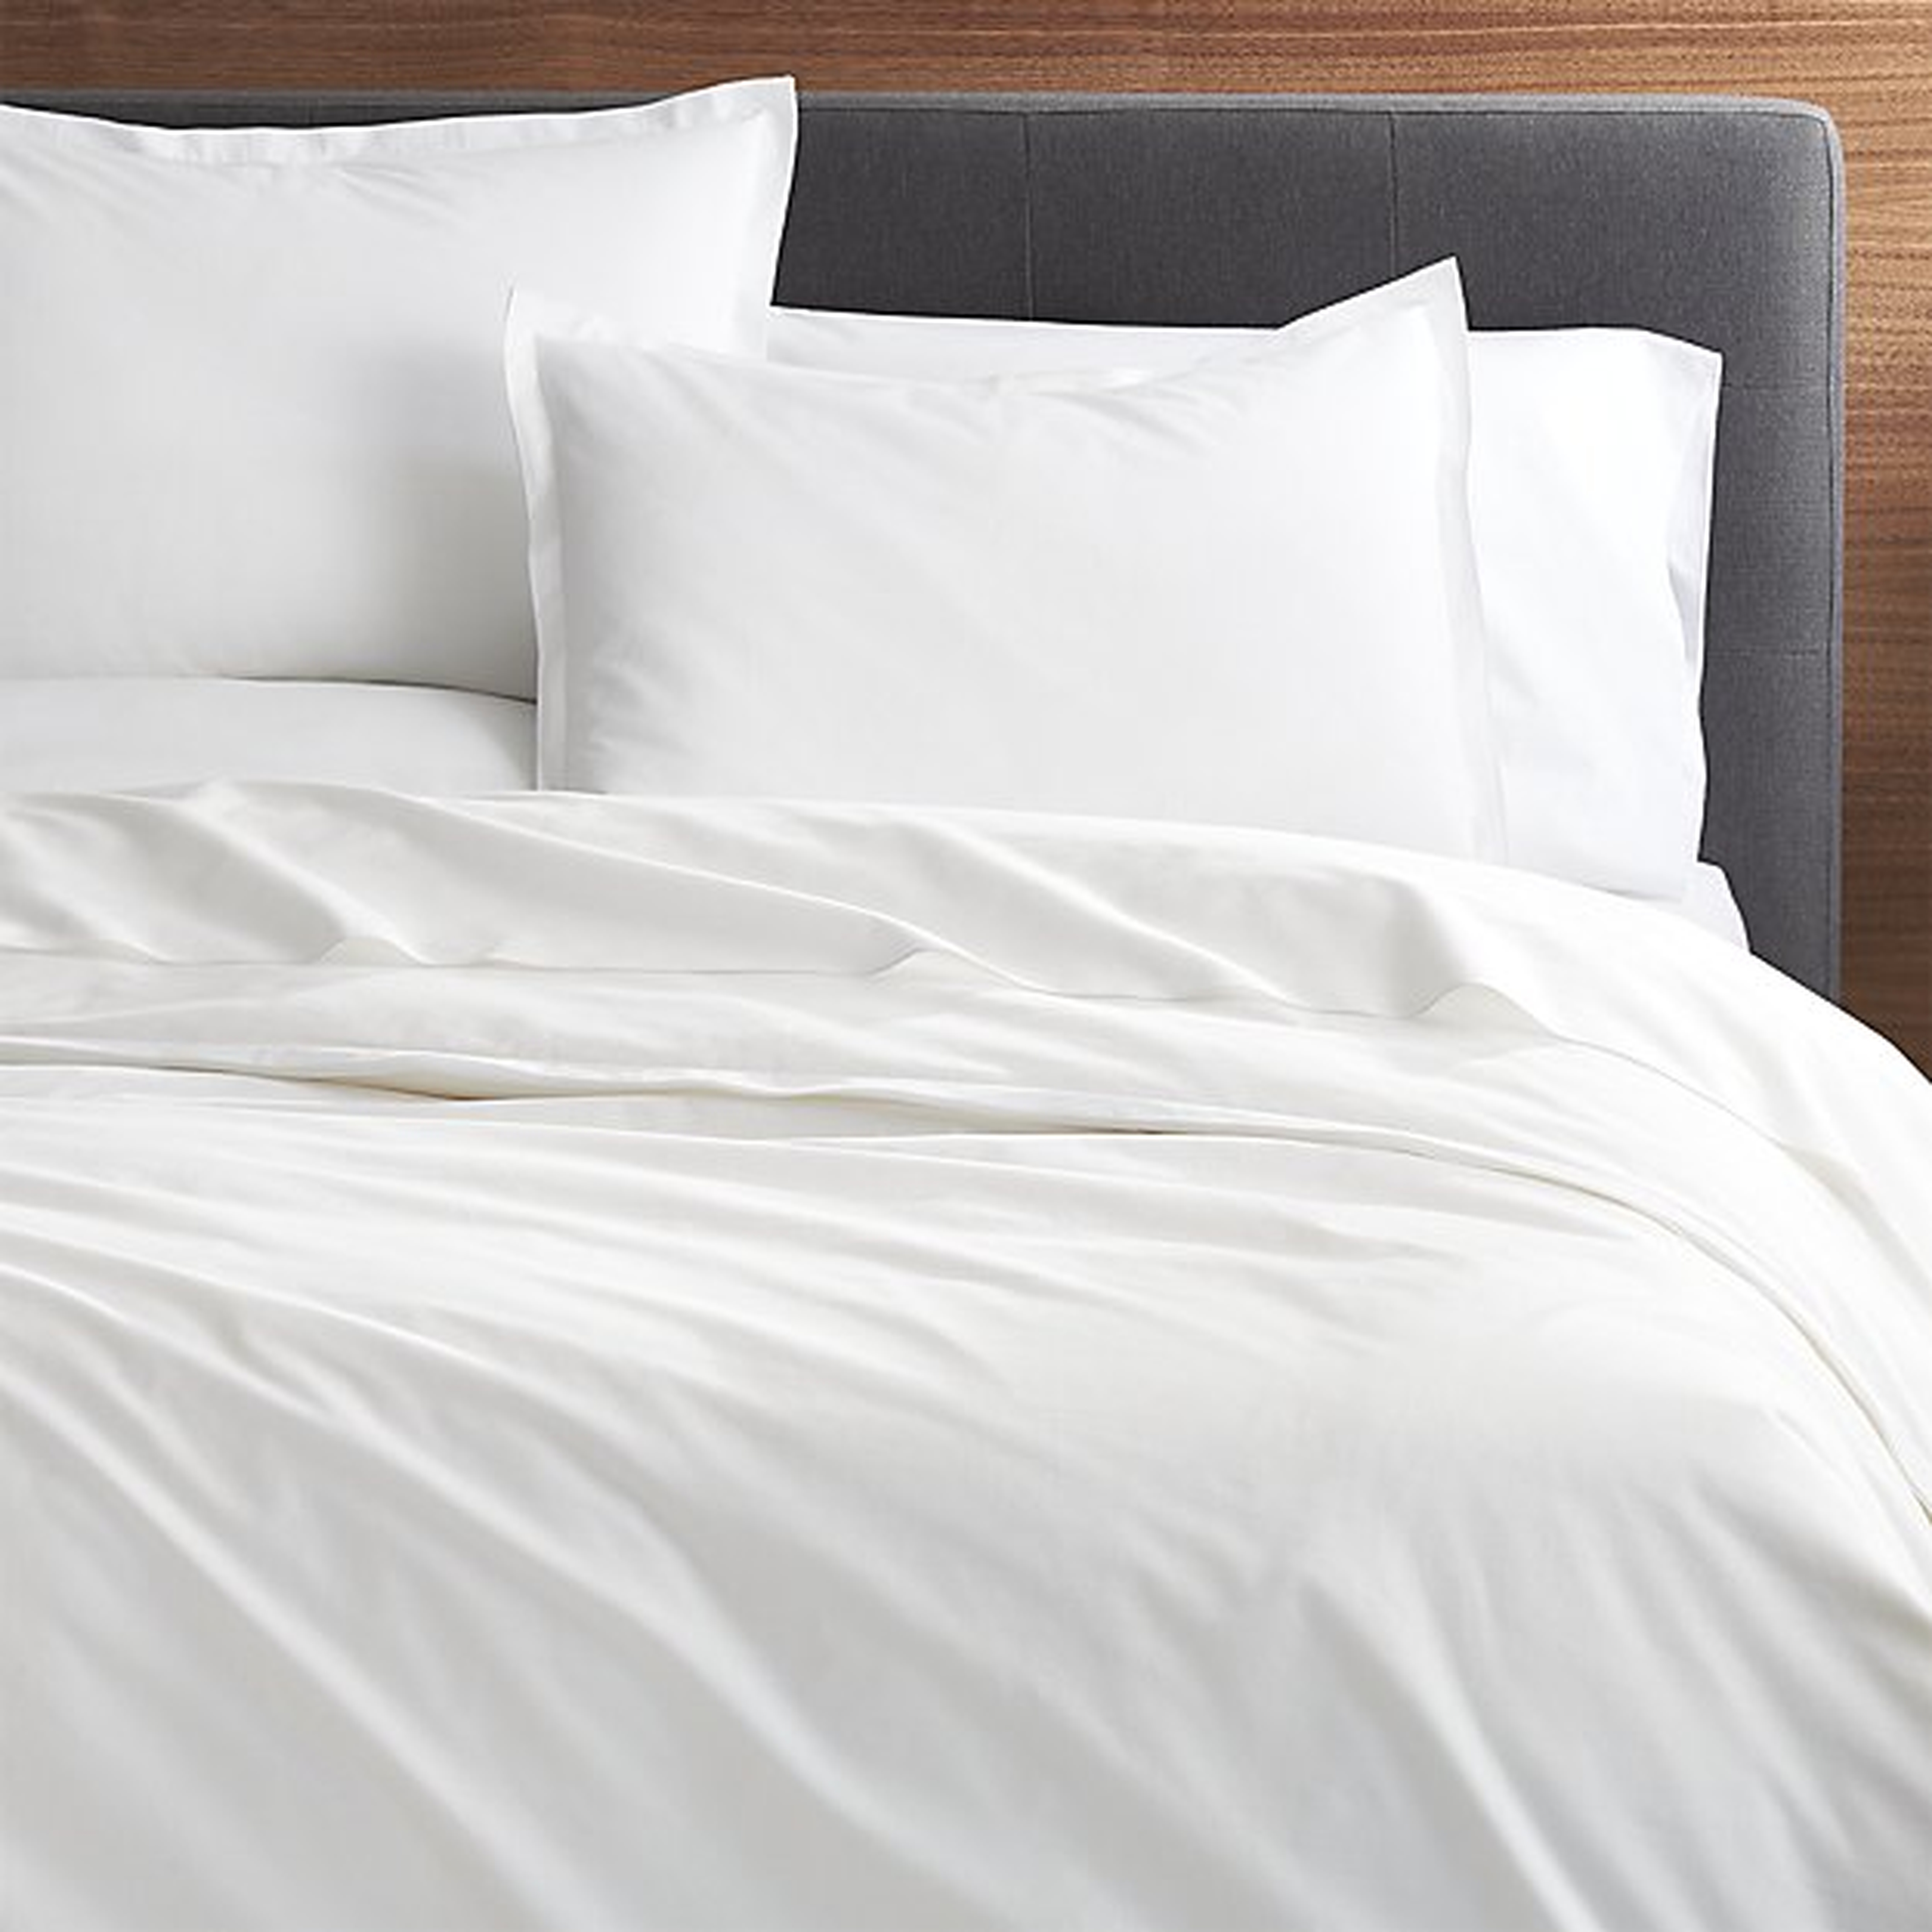 Belo White King Duvet Cover - Crate and Barrel